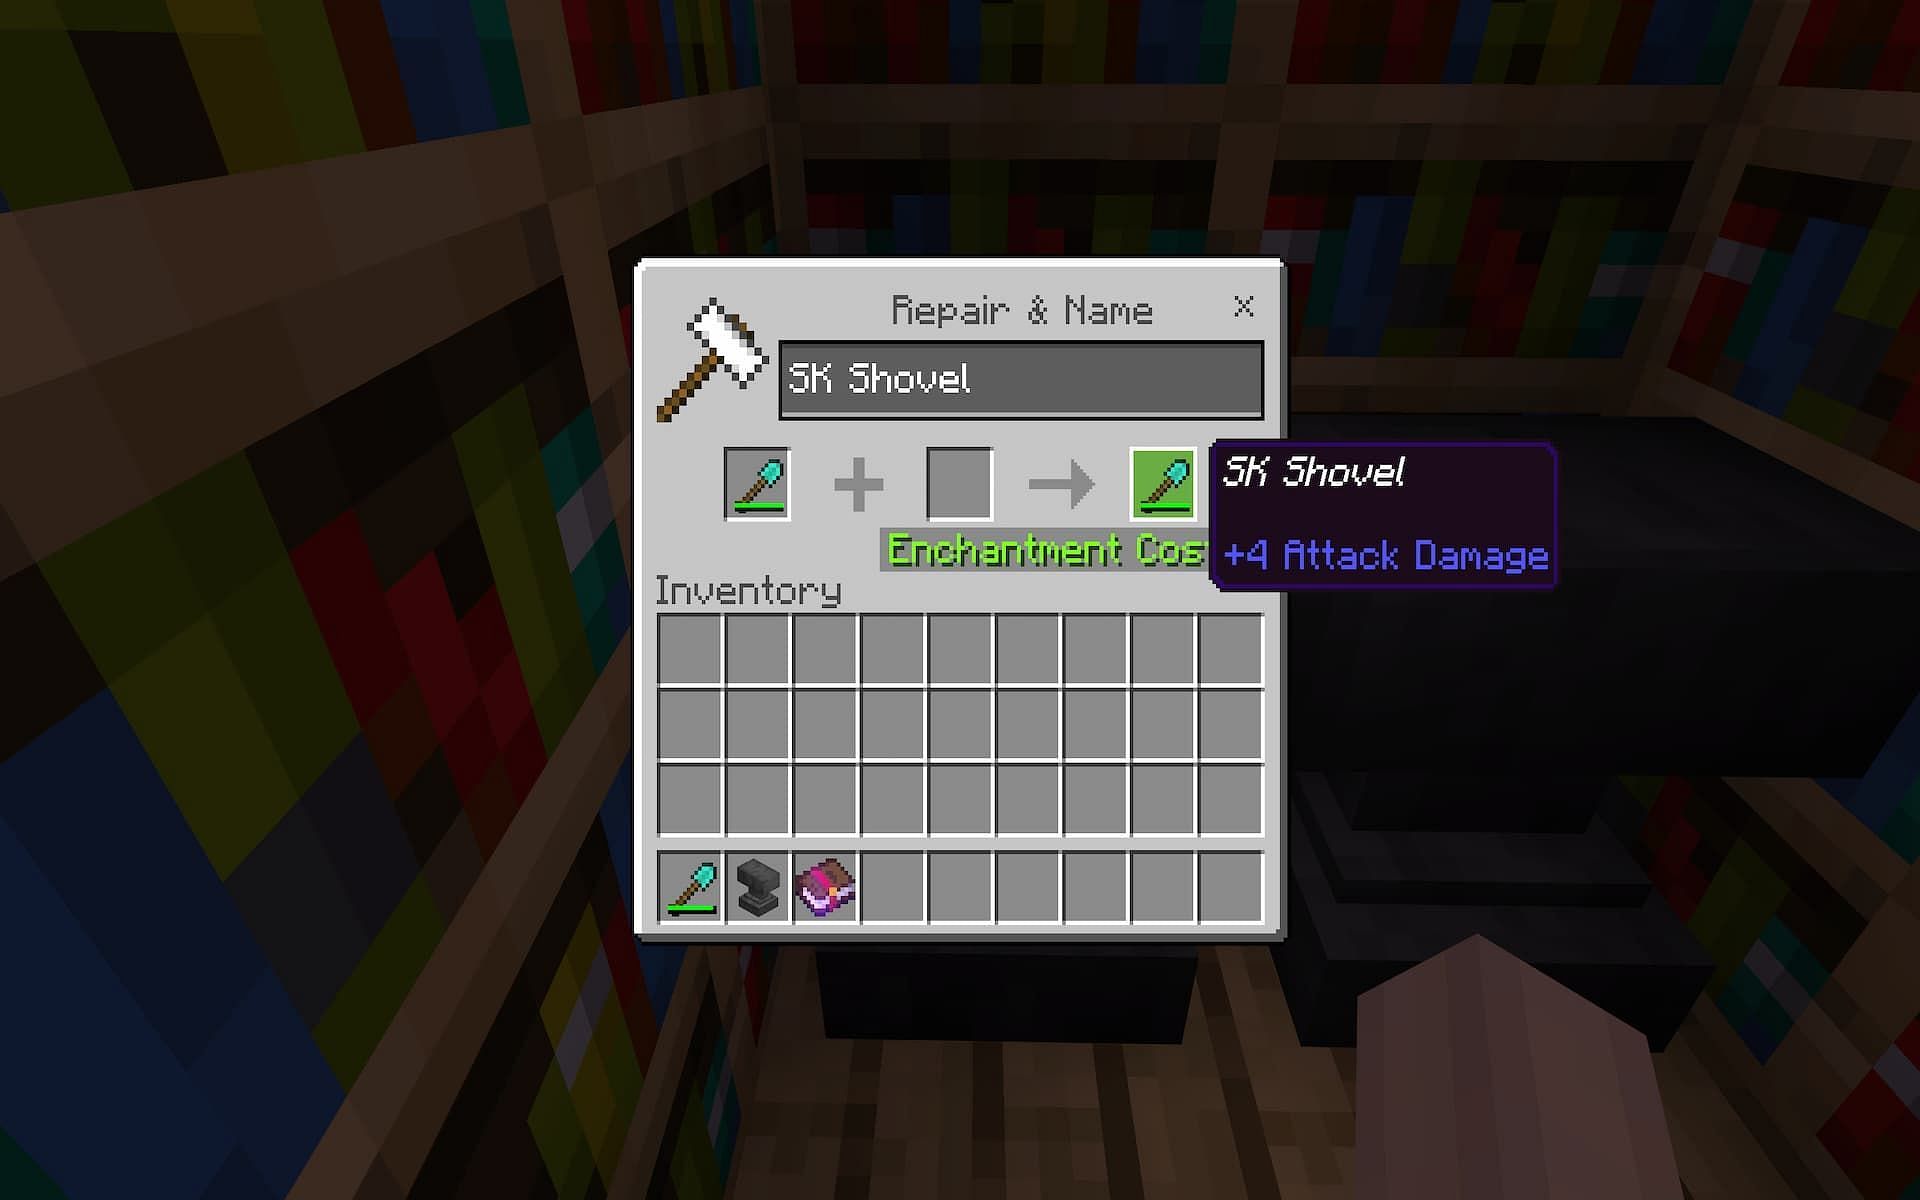 Renaming gear can help players personalize their items in-game (Image via Minecraft)